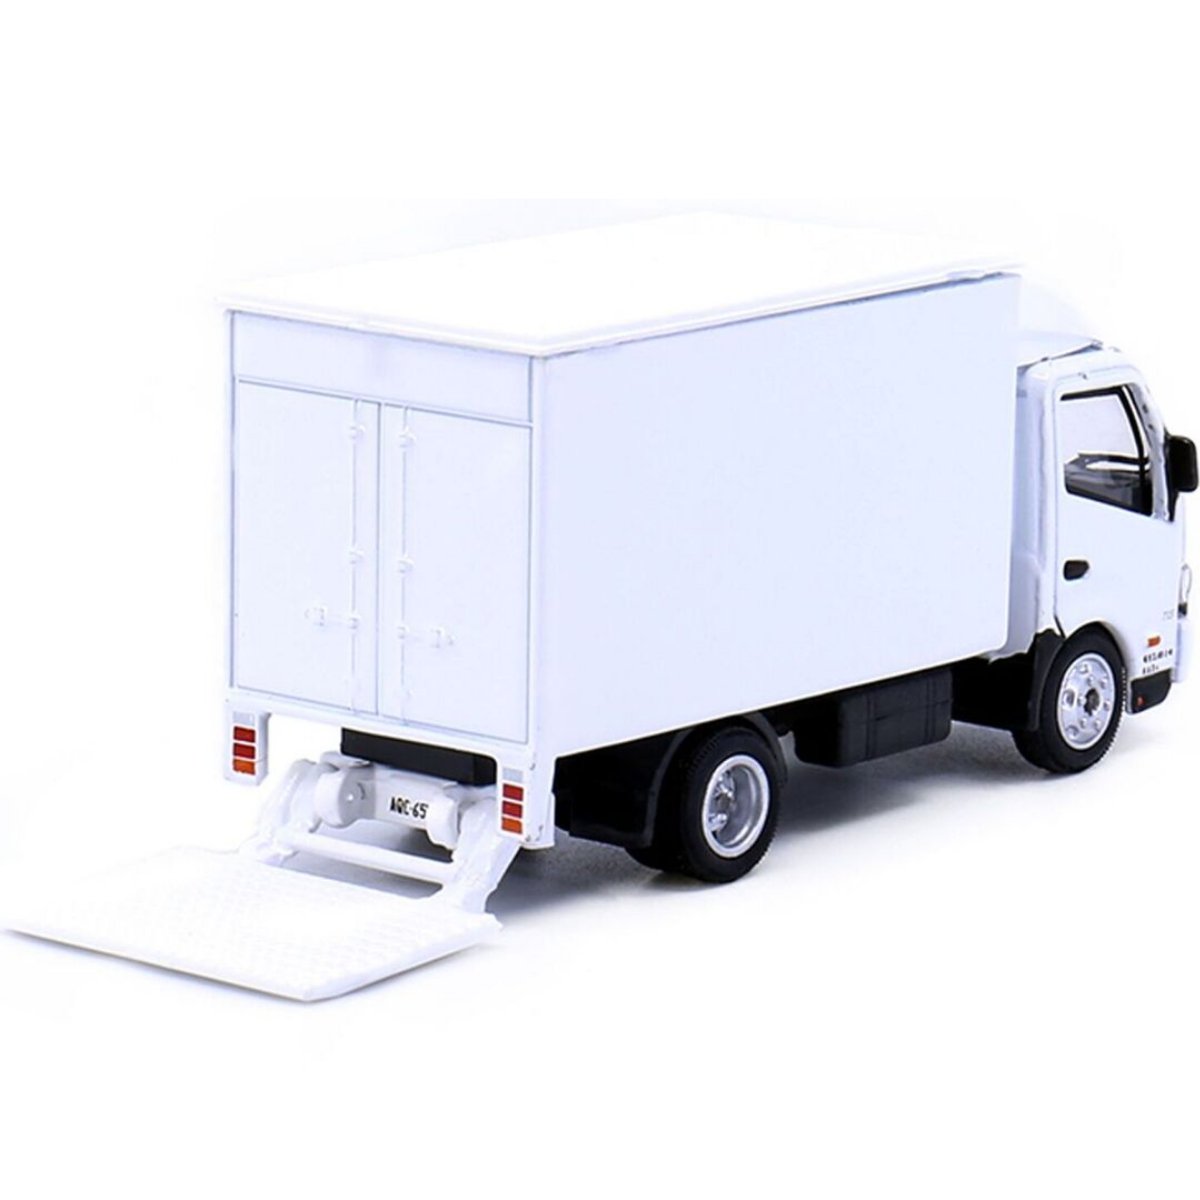 Tiny Models Hino 300 Box Lorry (1:64 Scale) - Phillips Hobbies